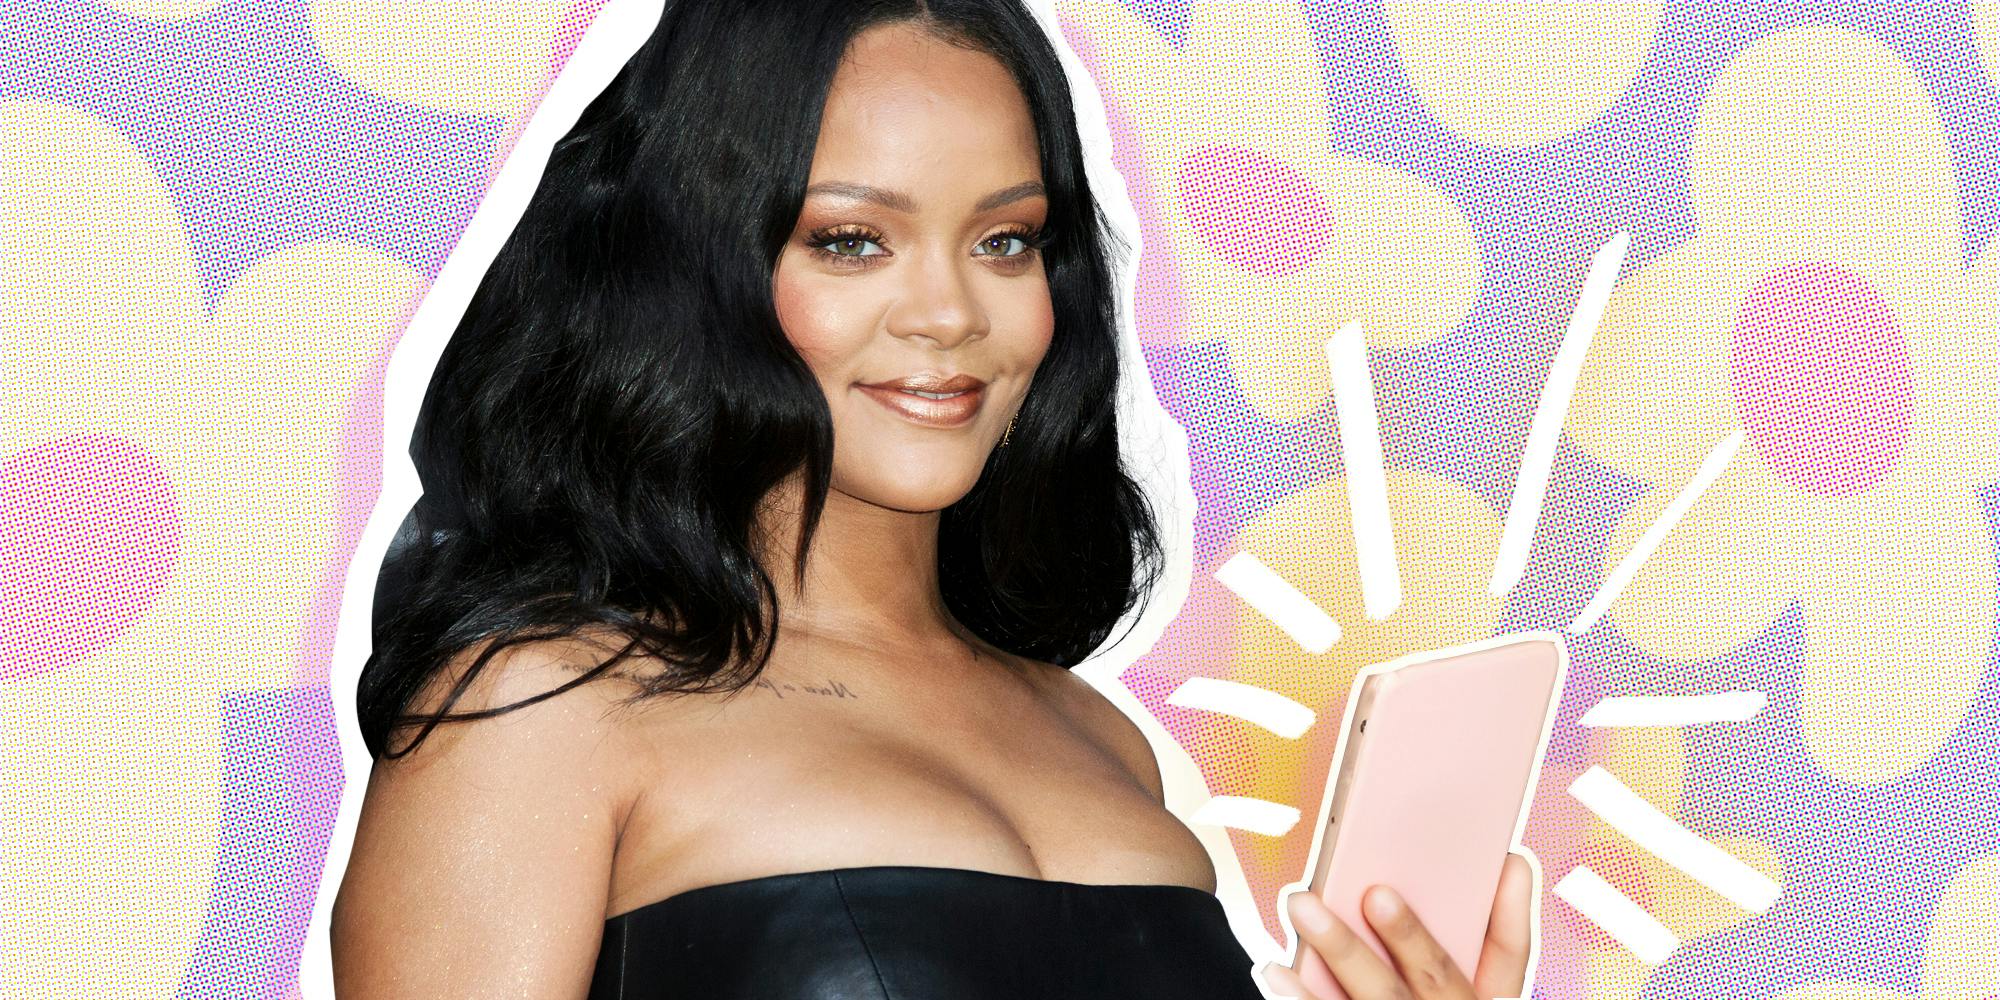 Rihanna with phone in front of floral background